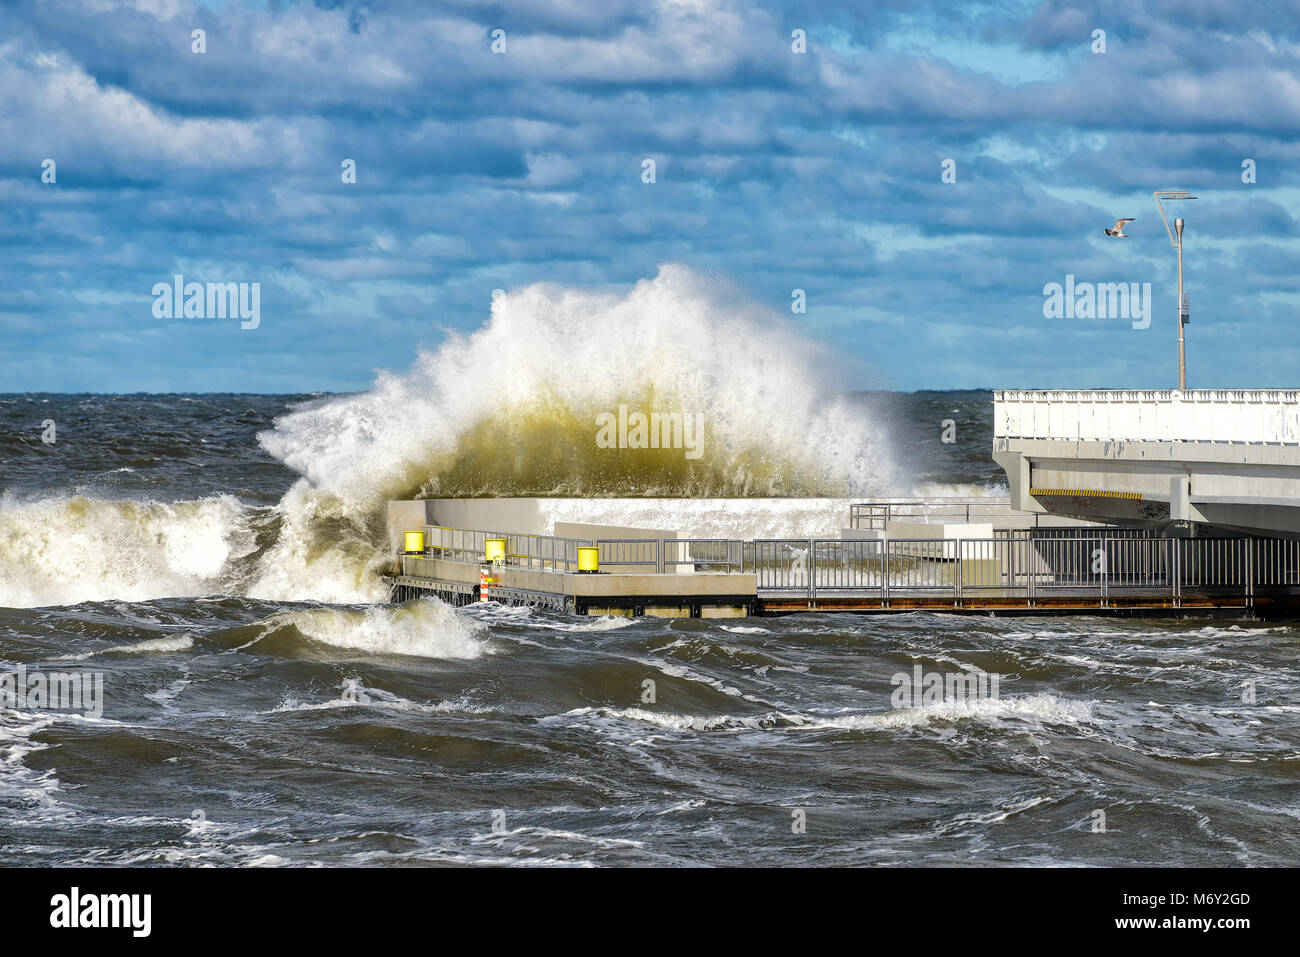 big braking waves during a gale in Kolobrzeg on the coast of the Baltic sea in Poland Stock Photo